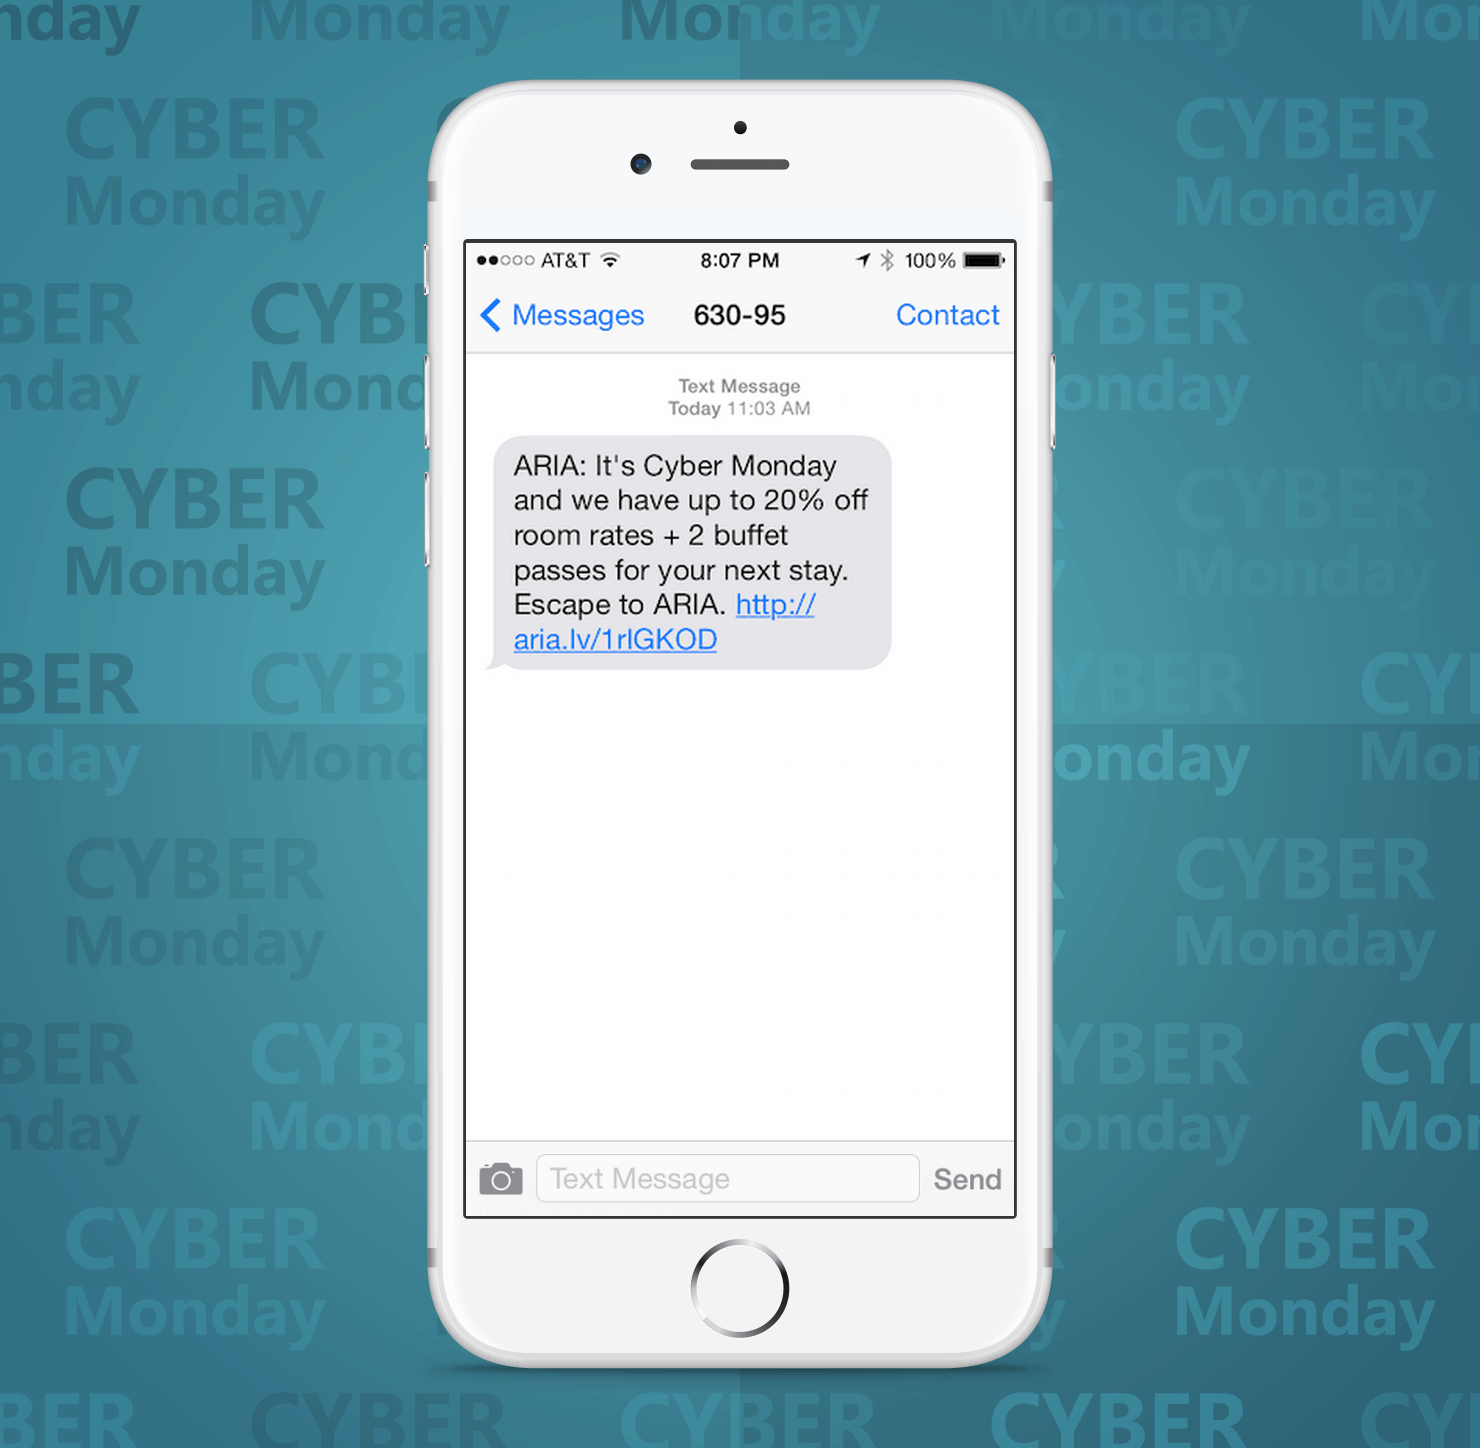 SMS Coupon Example Sent on Cyber Monday From Aria Hotels and Casinos to Customers